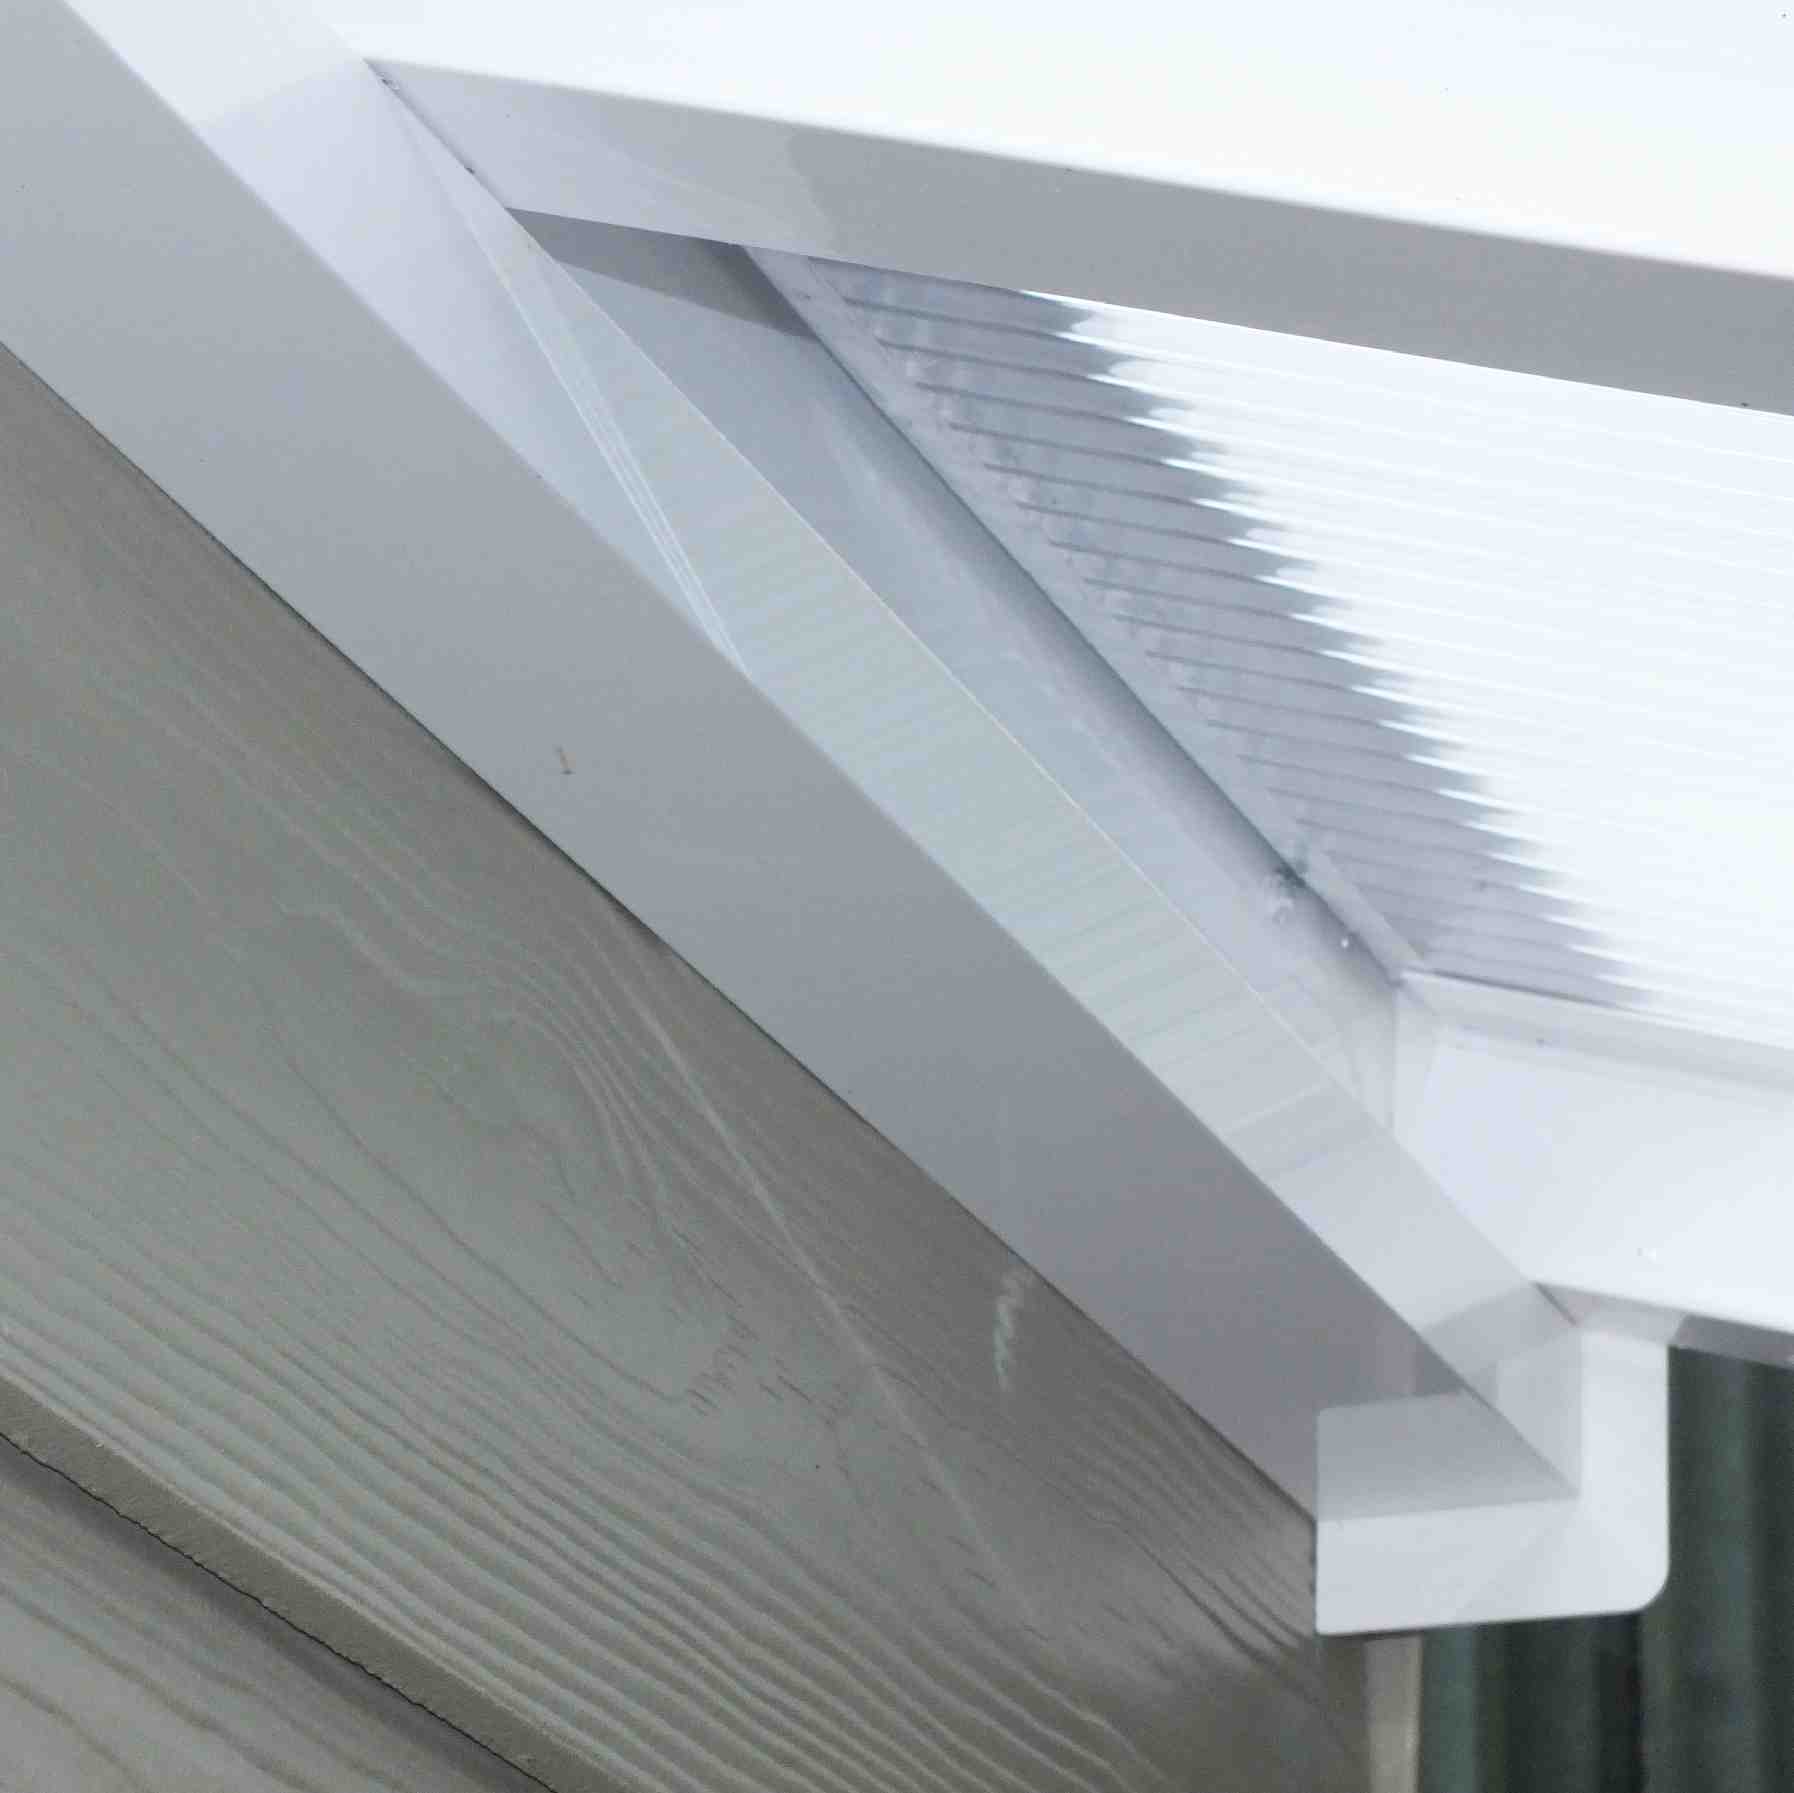 Great deals on Omega Verandah White with 16mm Polycarbonate Glazing - 6.0m (W) x 3.5m (P), (3) Supporting Posts